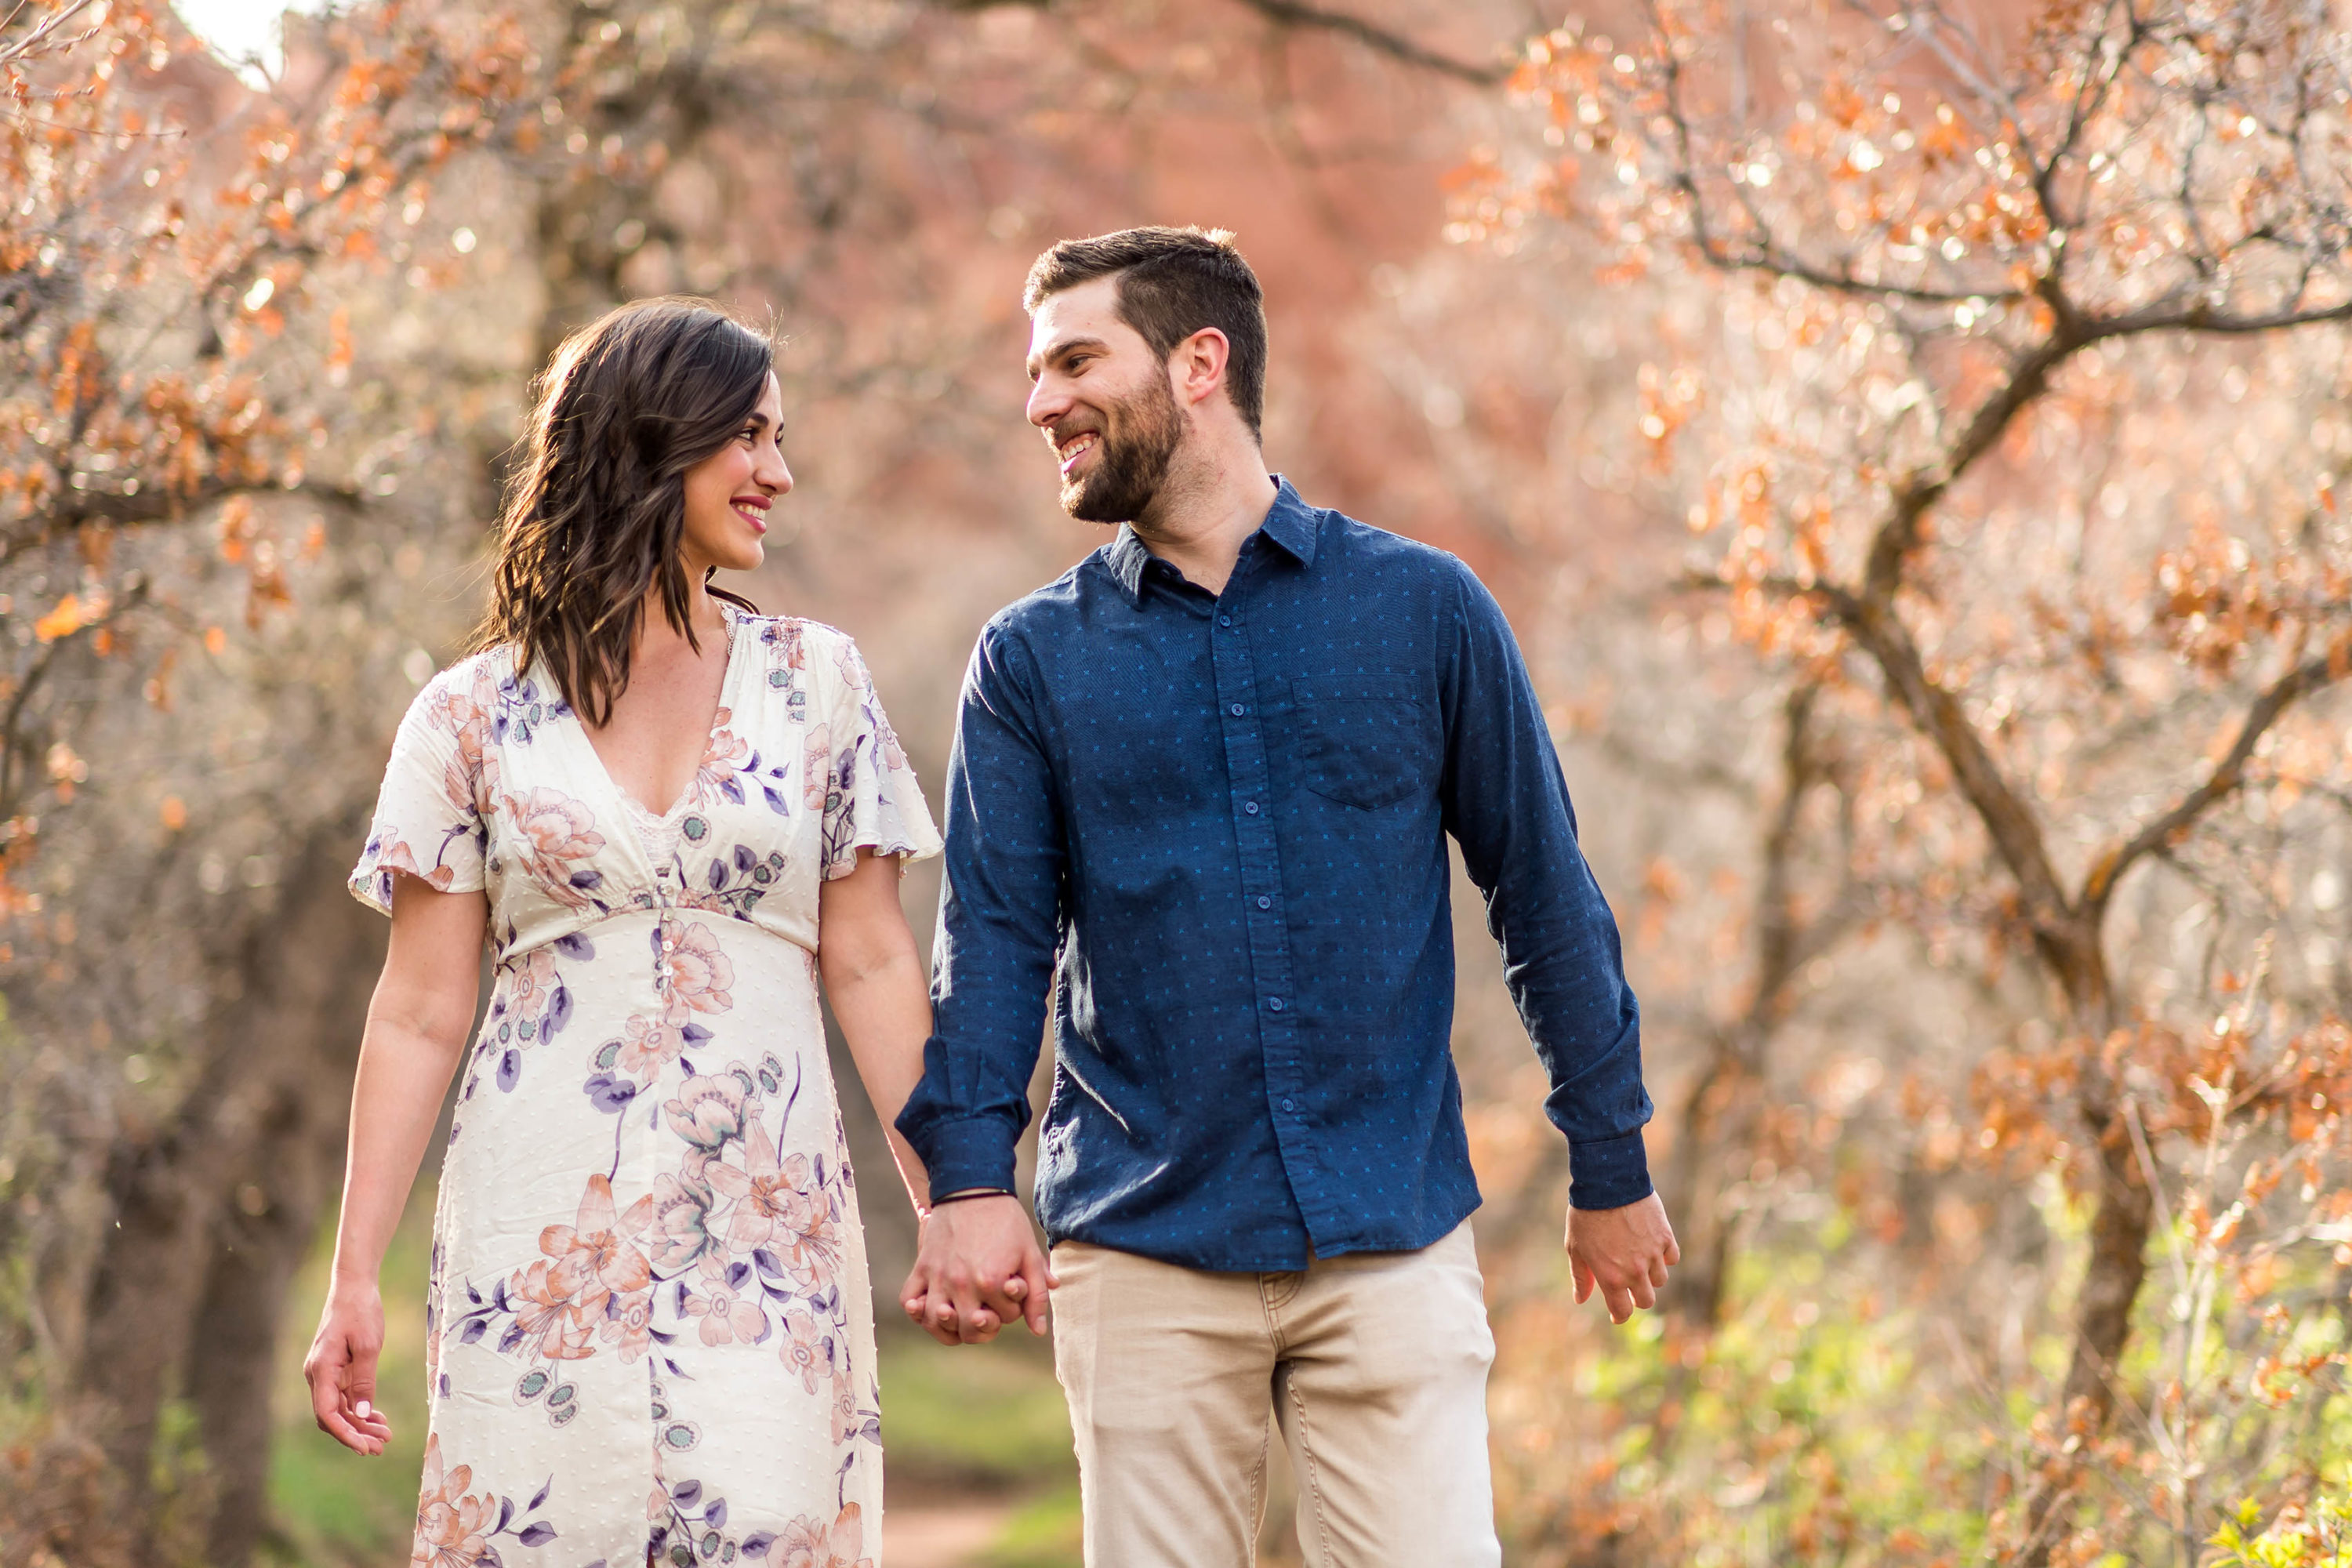 Roxborough State Park Engagement photos with Mary and Charlie in Littleton, Colorado, on May 7, 2021.